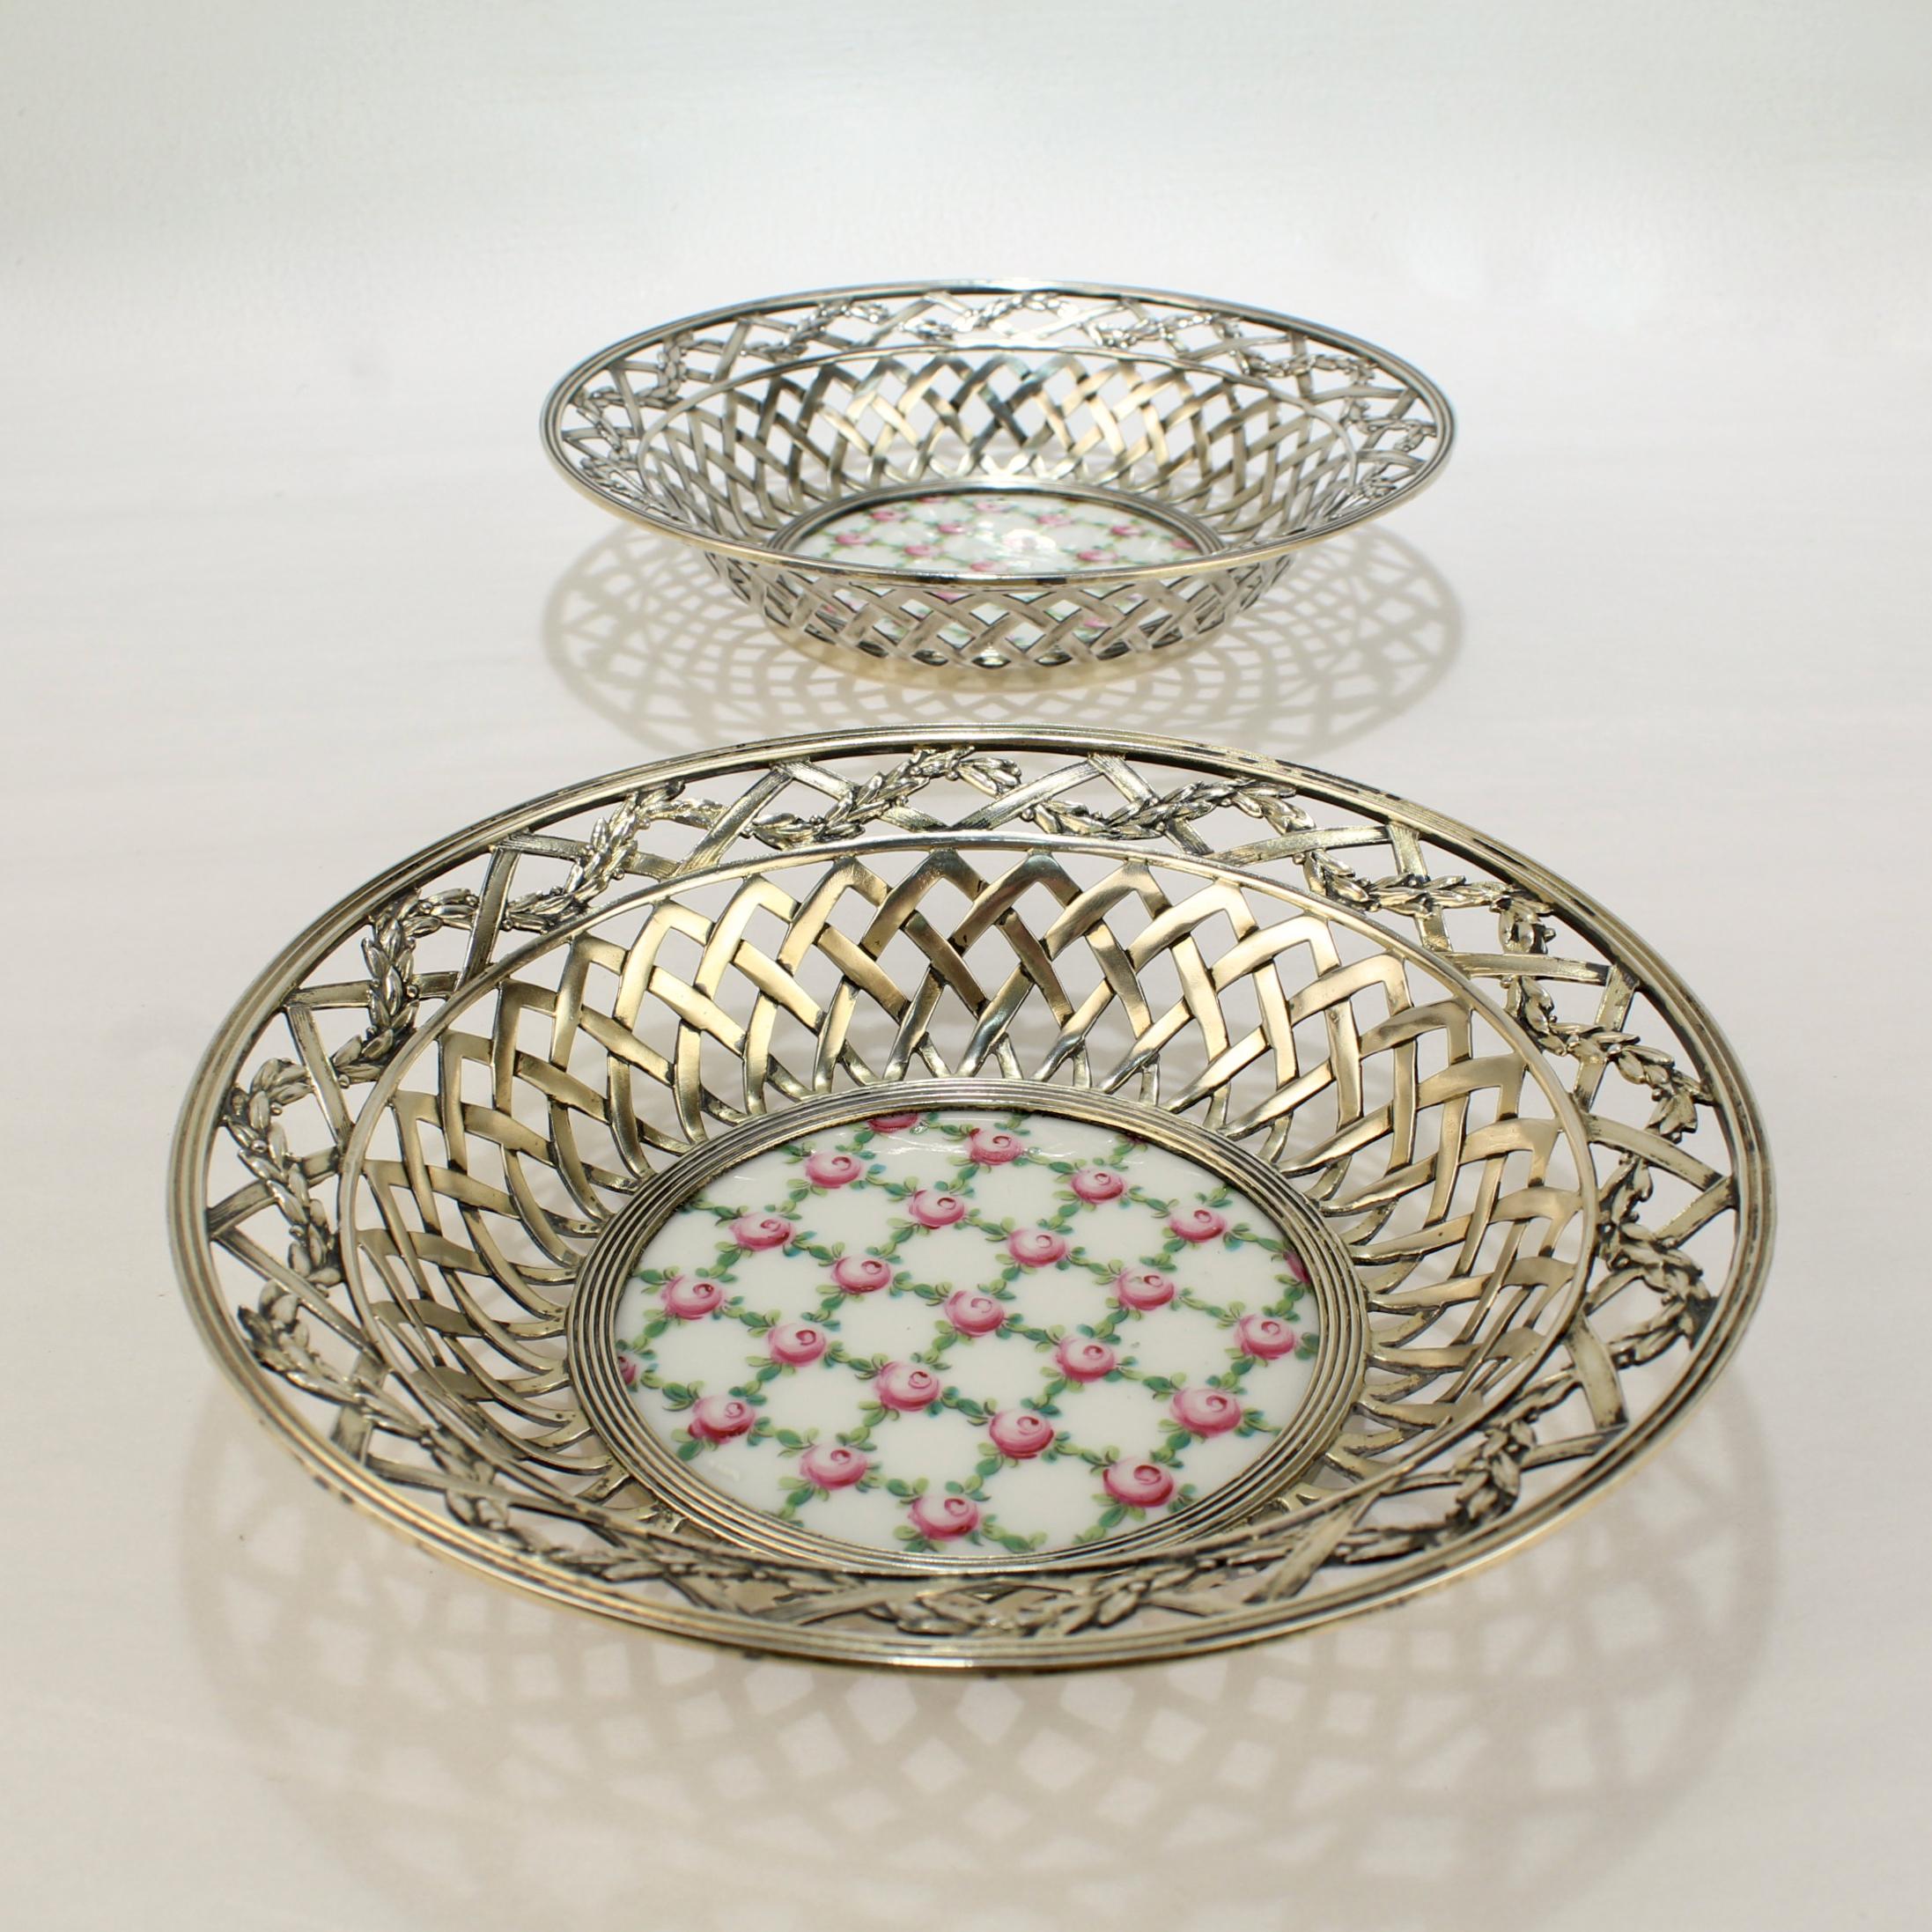 A fine pair of associated reticulated .935 sterling silver bowls.

Each with a round Sevres-type porcelain insert at the base, basketweave design, and intertwined garland and ribbon border. 

The porcelain plaques or inserts have a lattice pattern